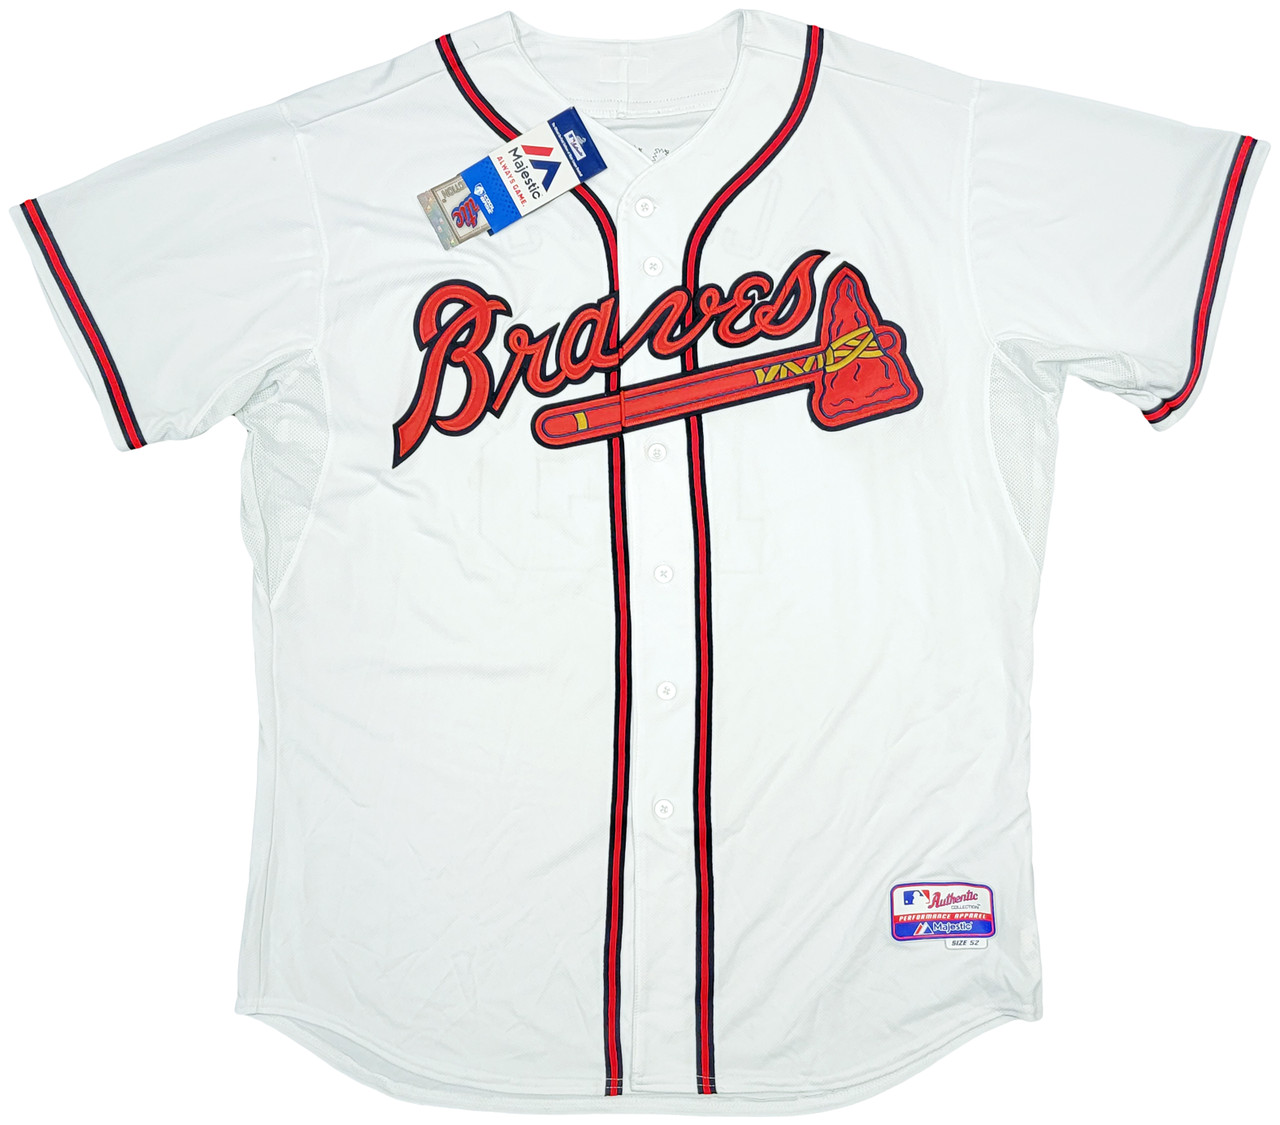  Braves Ronald Acuna Jr. Autographed Majestic Cool Base White  Jersey Size L M.L.B. Debut 4-25-18 Beckett BAS : Sports & Outdoors